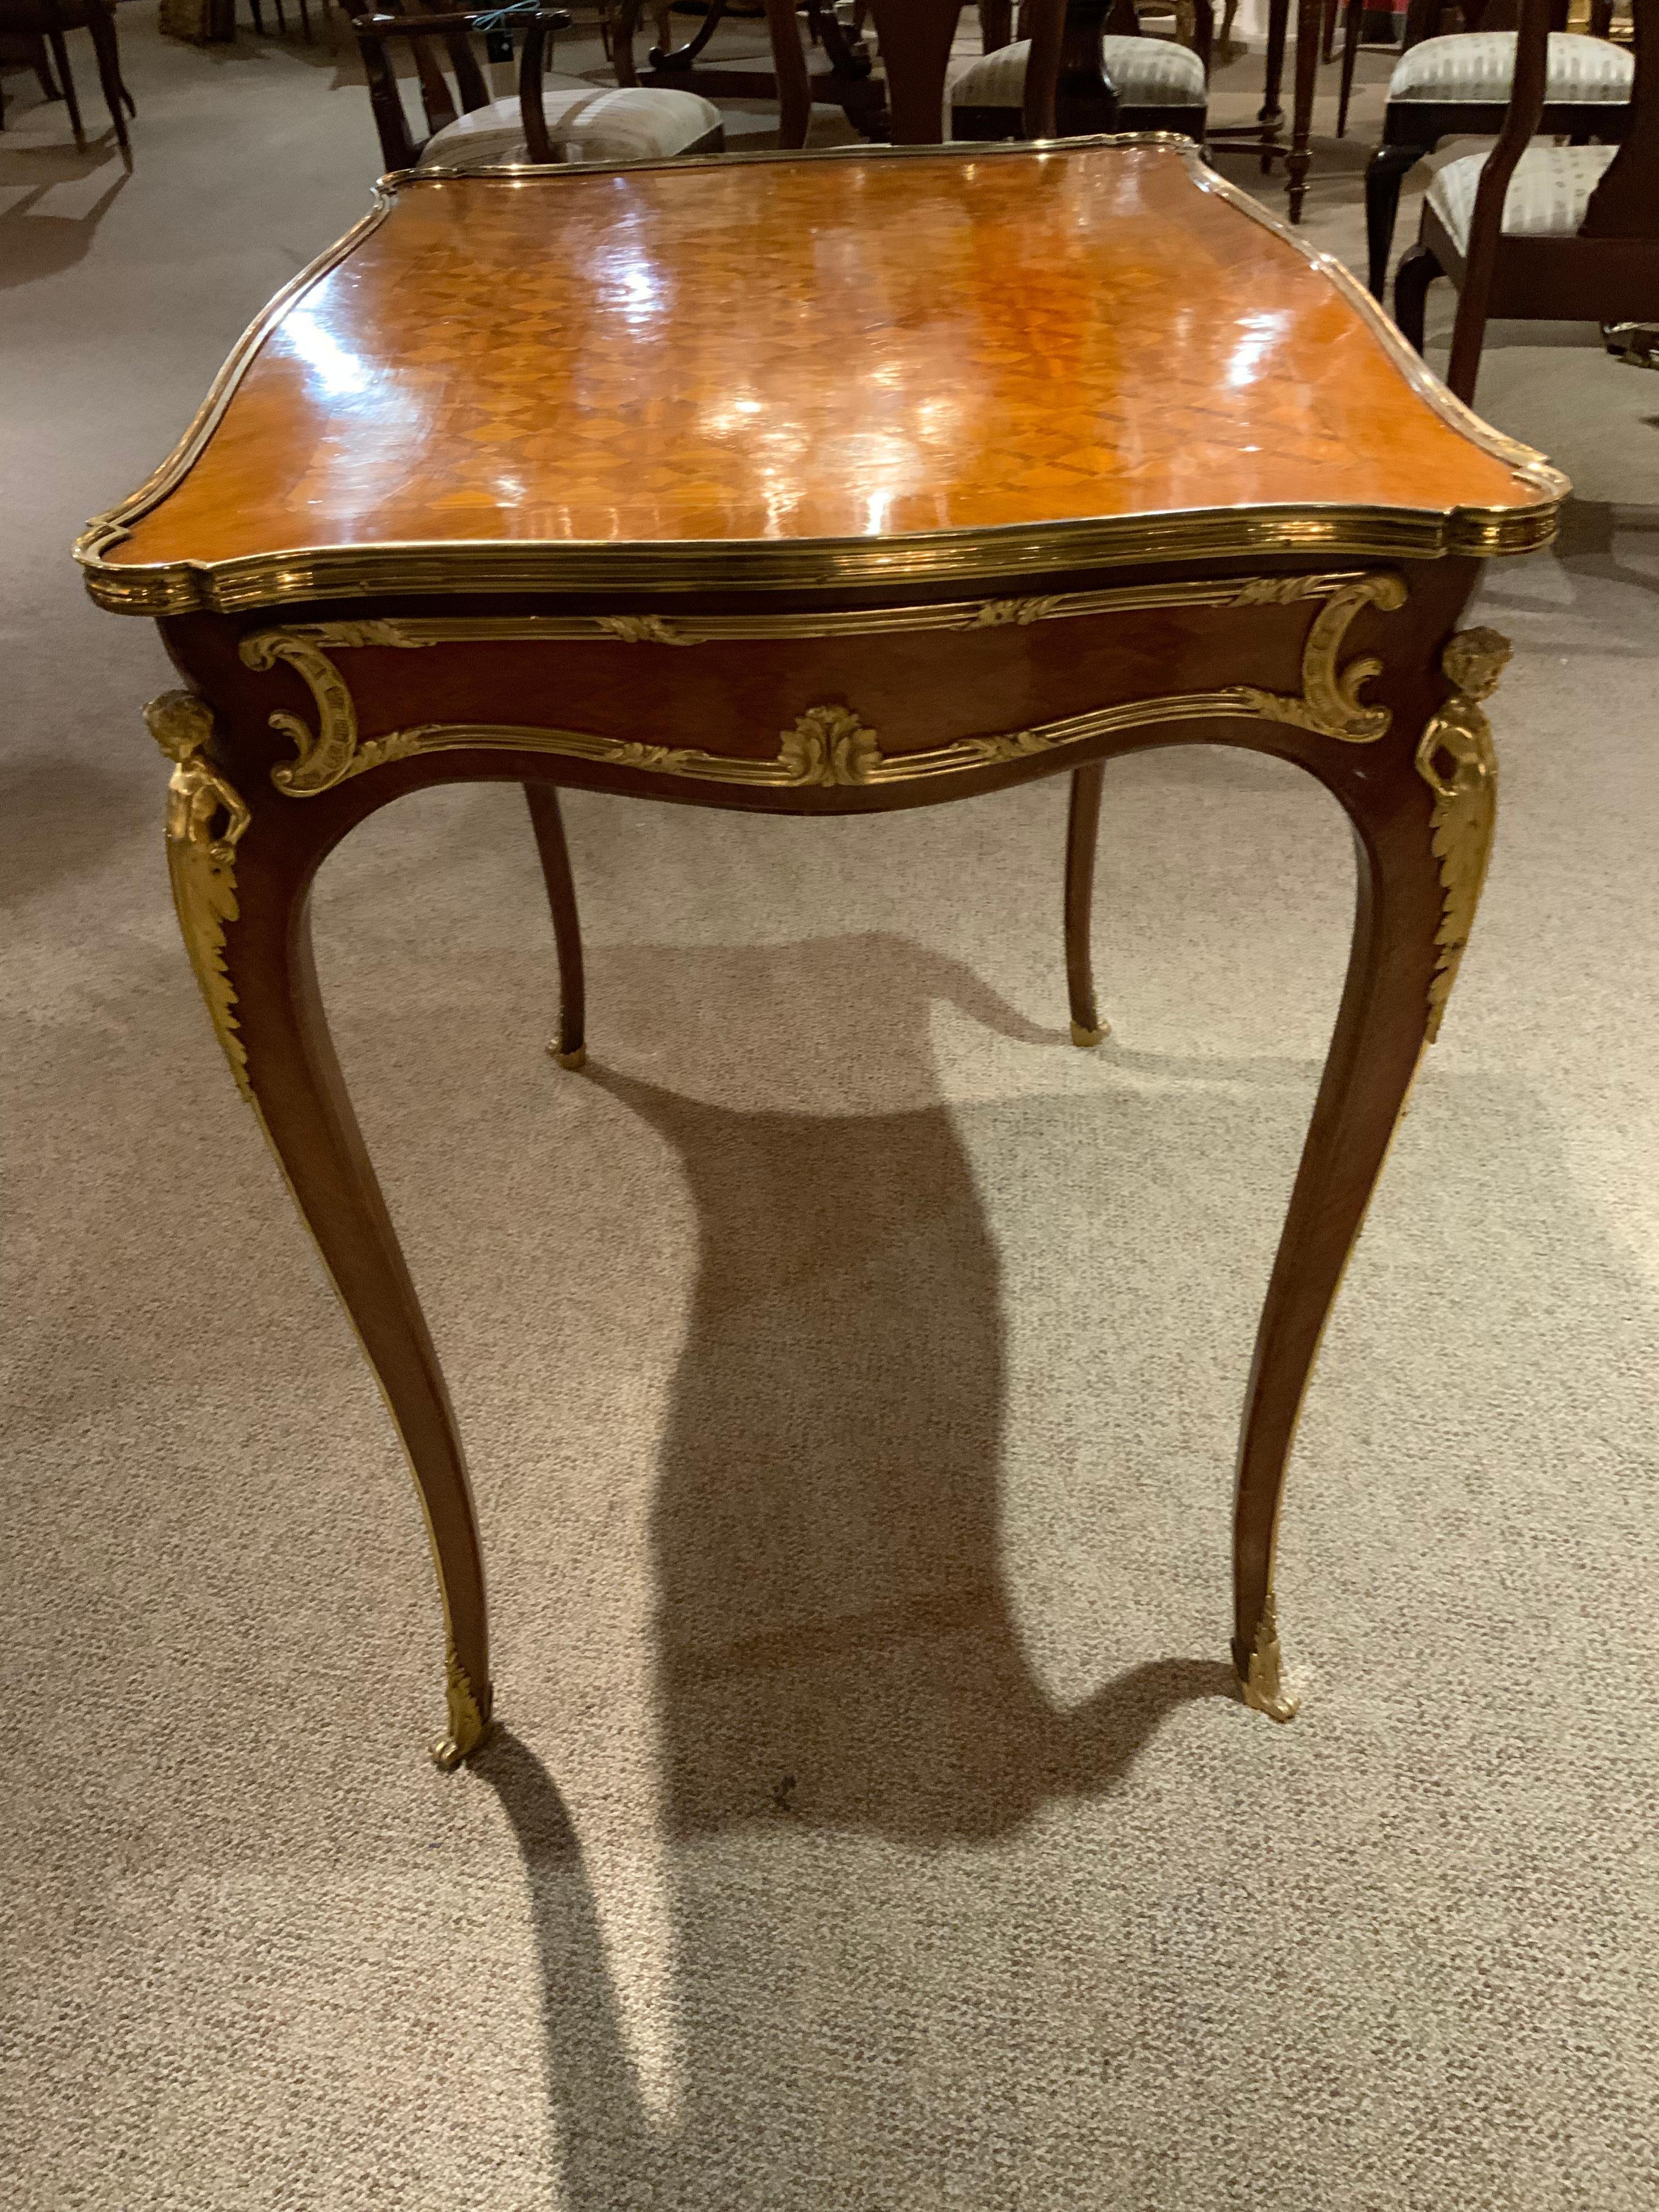 20th Century Fine French Marquetry Side Table with Gilt Bronze Mounts, Louis XVI-Style For Sale